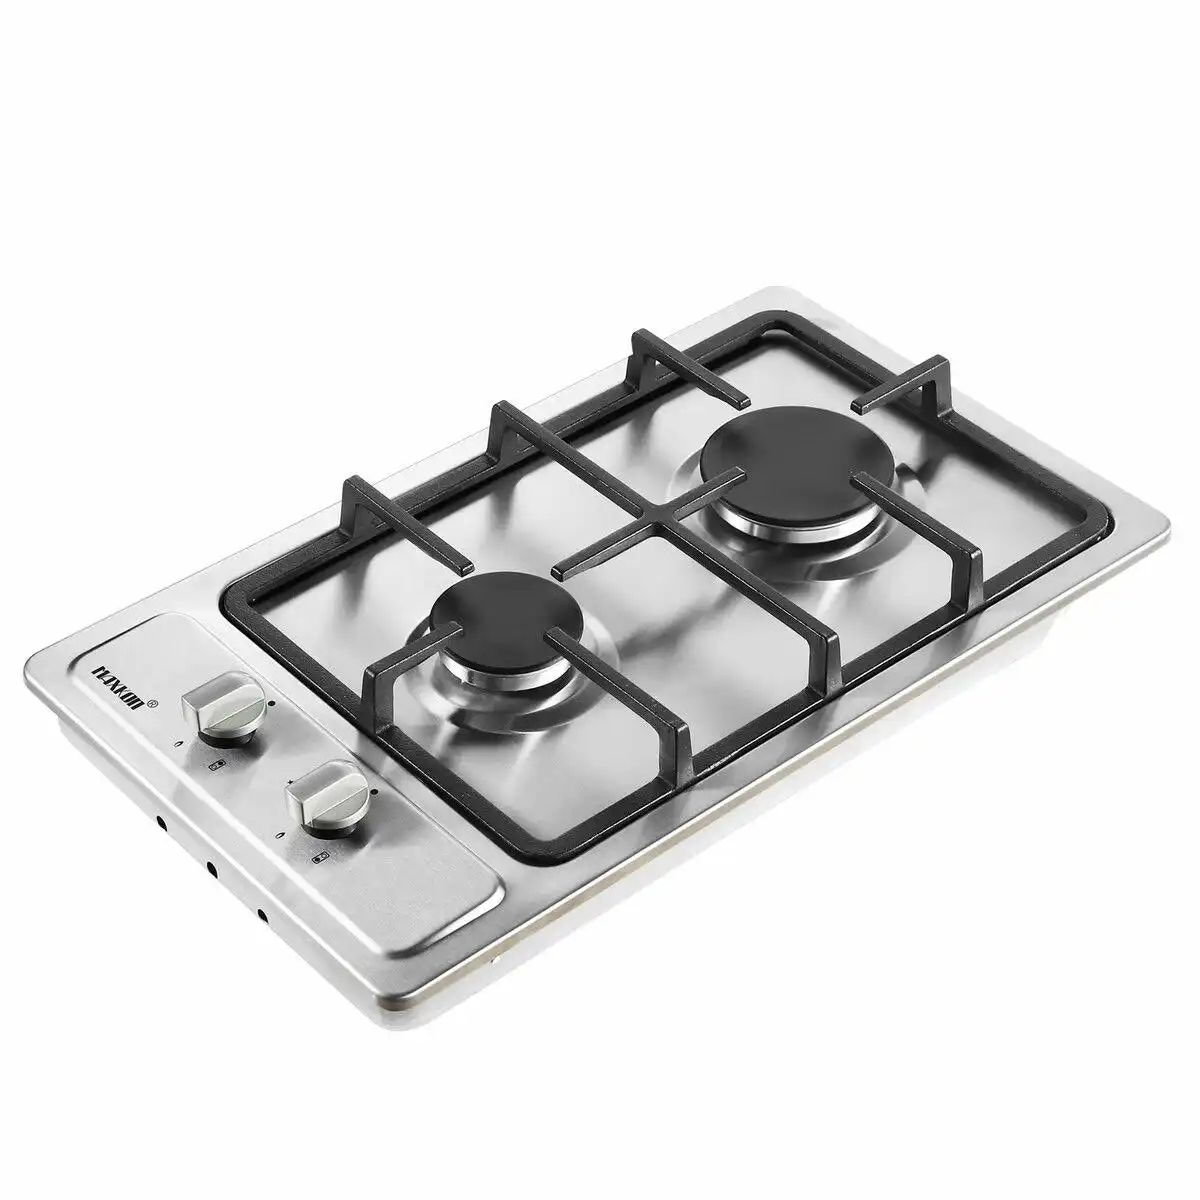 Maxkon Gas Cooktop 2 Burner Stove Hob Cooker Top Knobs 30cm NG LPG Stainless Steel Surface Silver